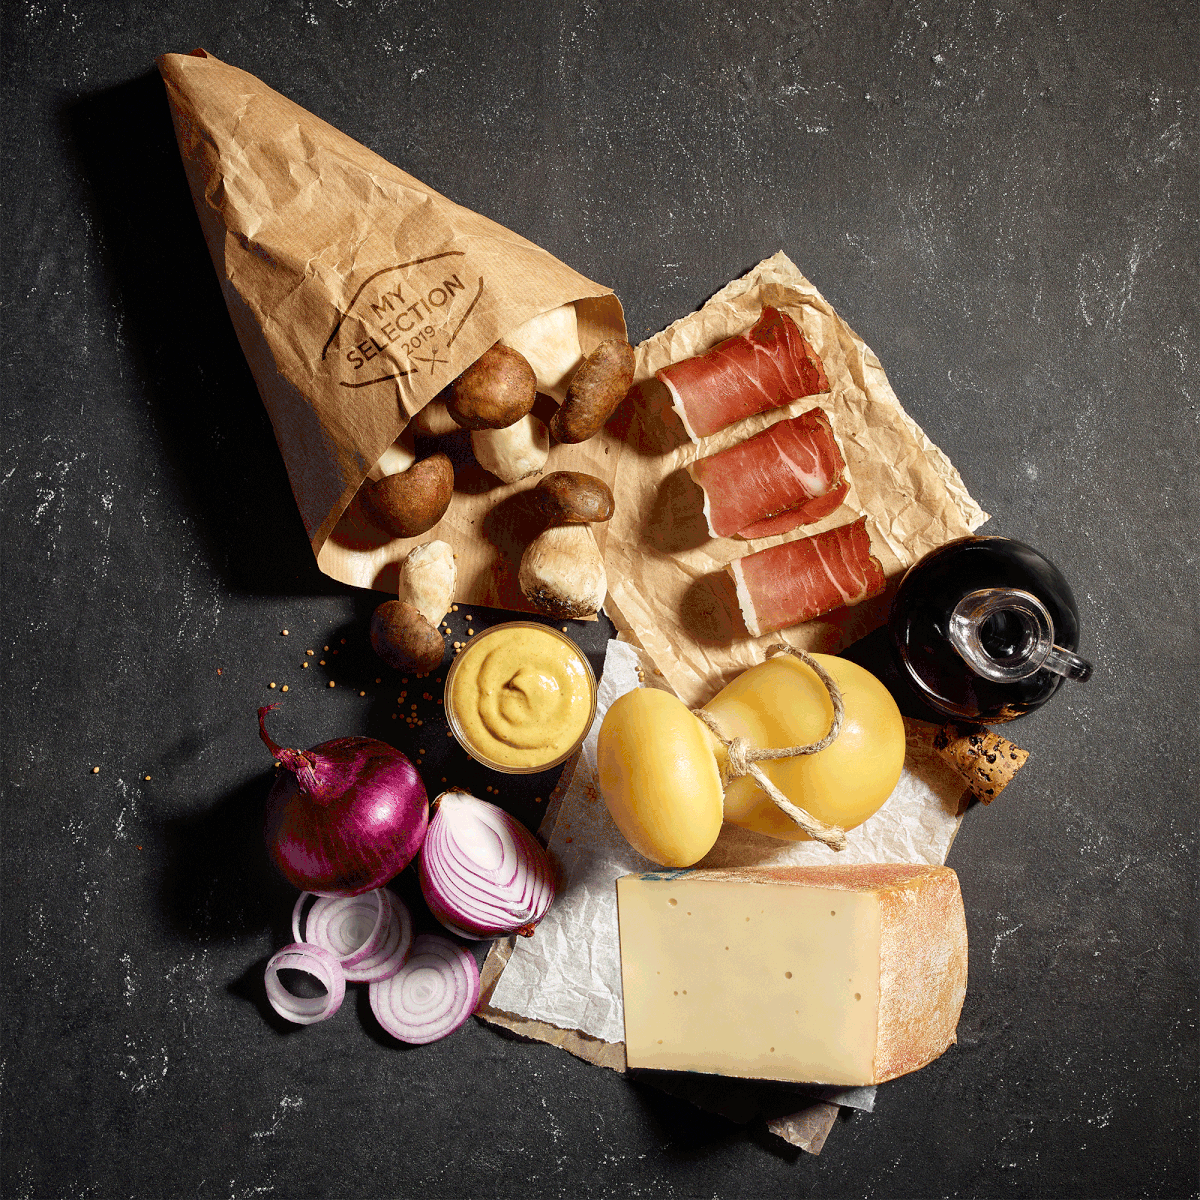 #food    #Sandwich #FastFood #meat #sauces #bacon #Backstage #Portrait #cheese